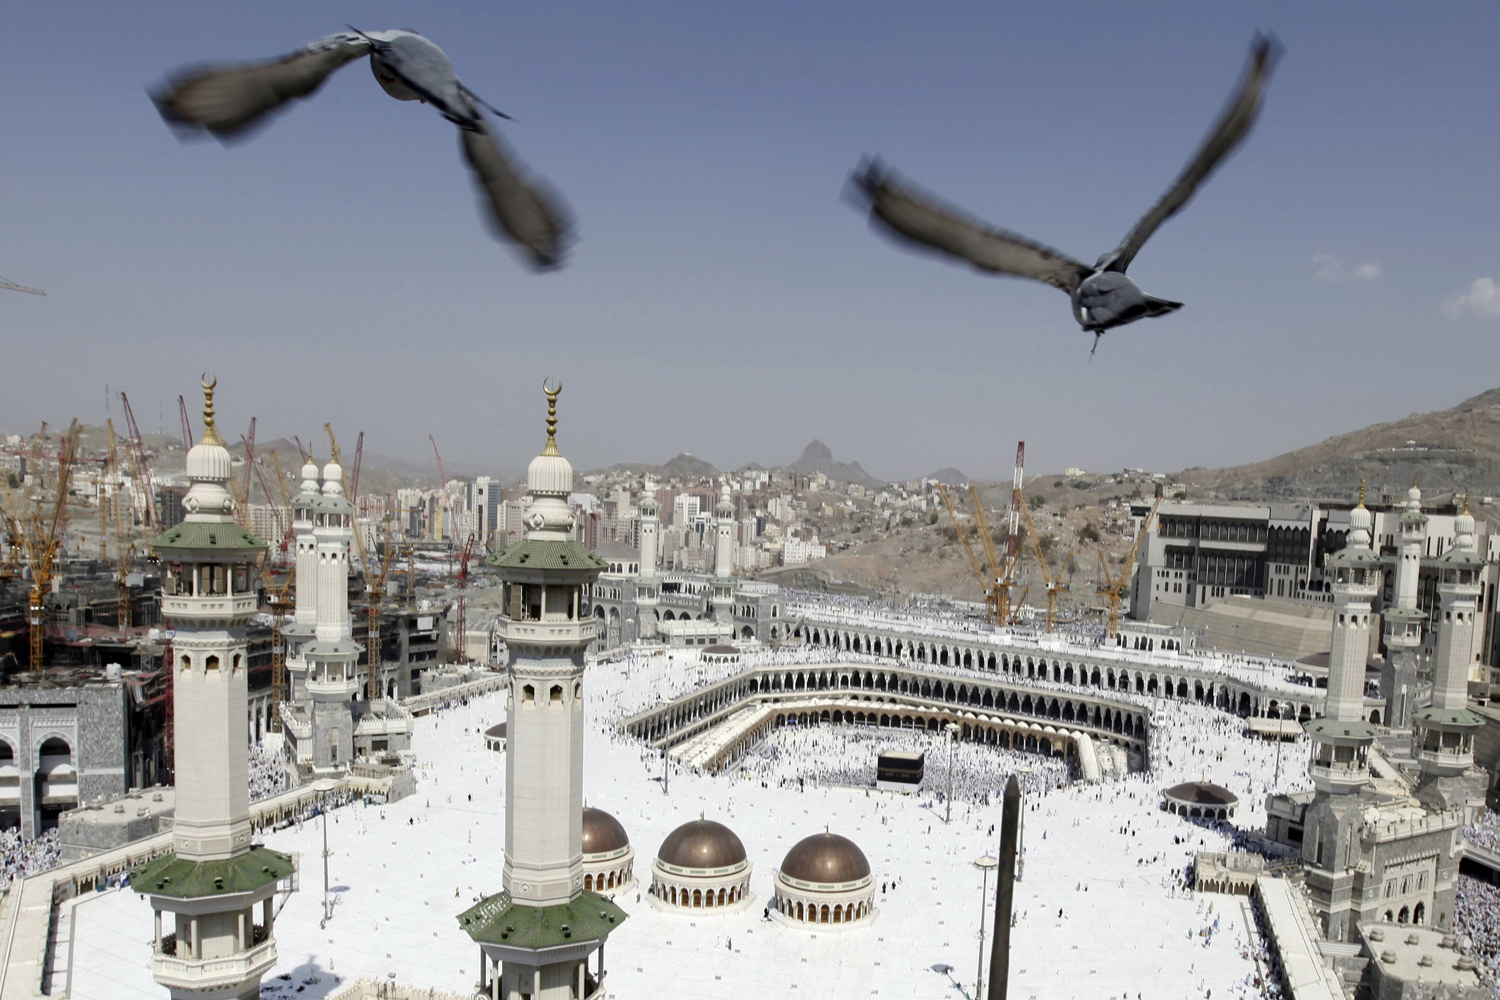 Image: Oct. 19, 2012. Pigeons fly over the Grand Mosque at Friday prayers during the annual haj pilgrimage in the holy city of Mecca, Saudi Arabia.